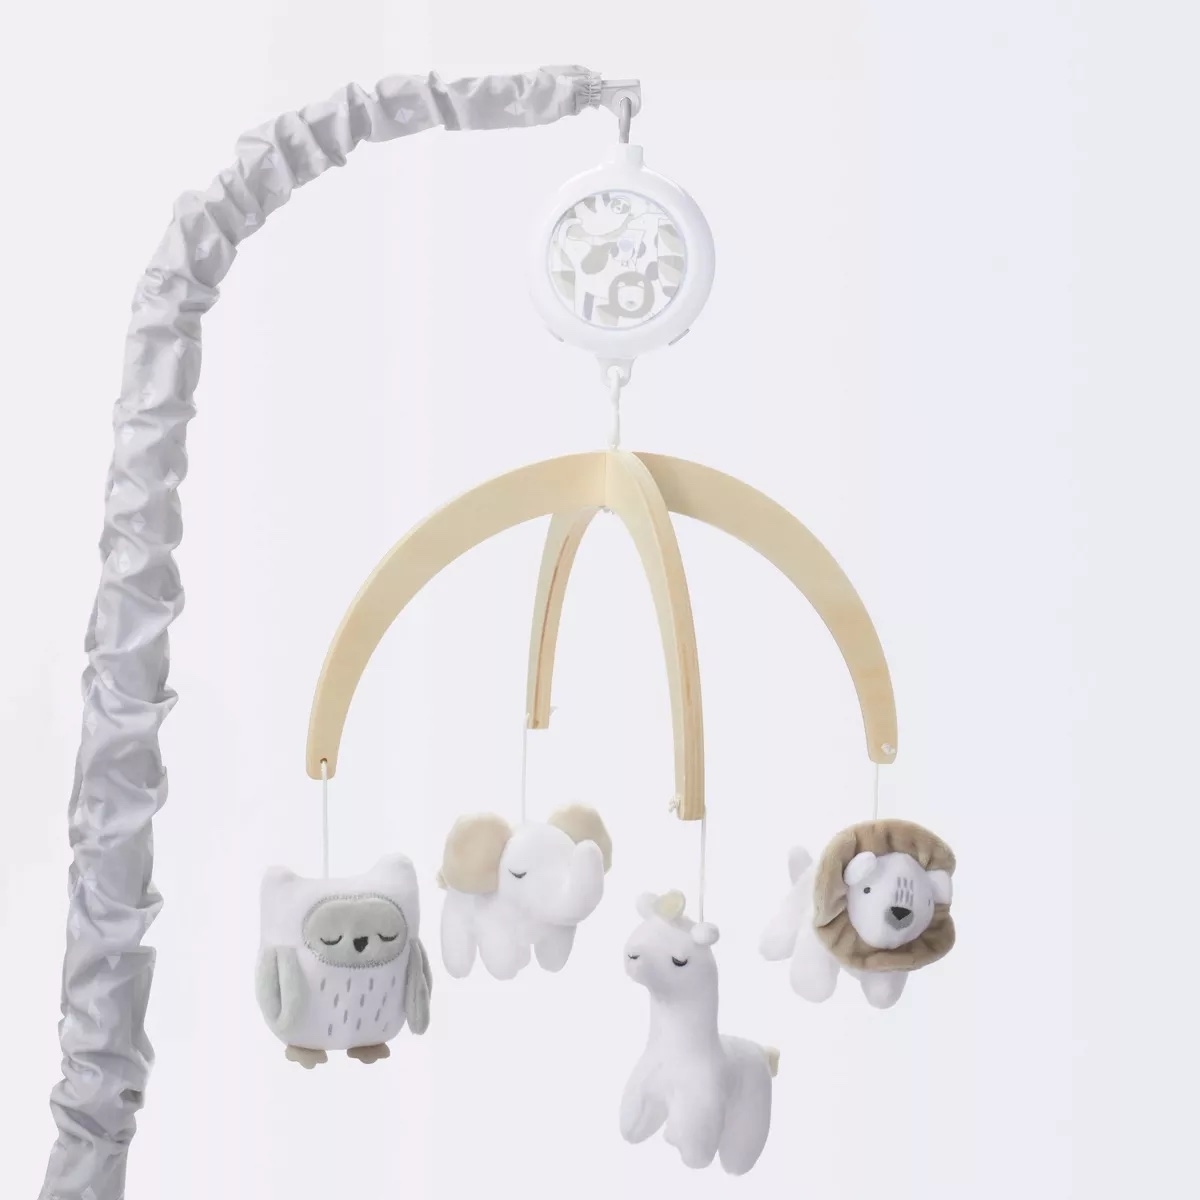 Baby mobile with plush owl, sheep, llama, and dog toys hanging, designed for a crib